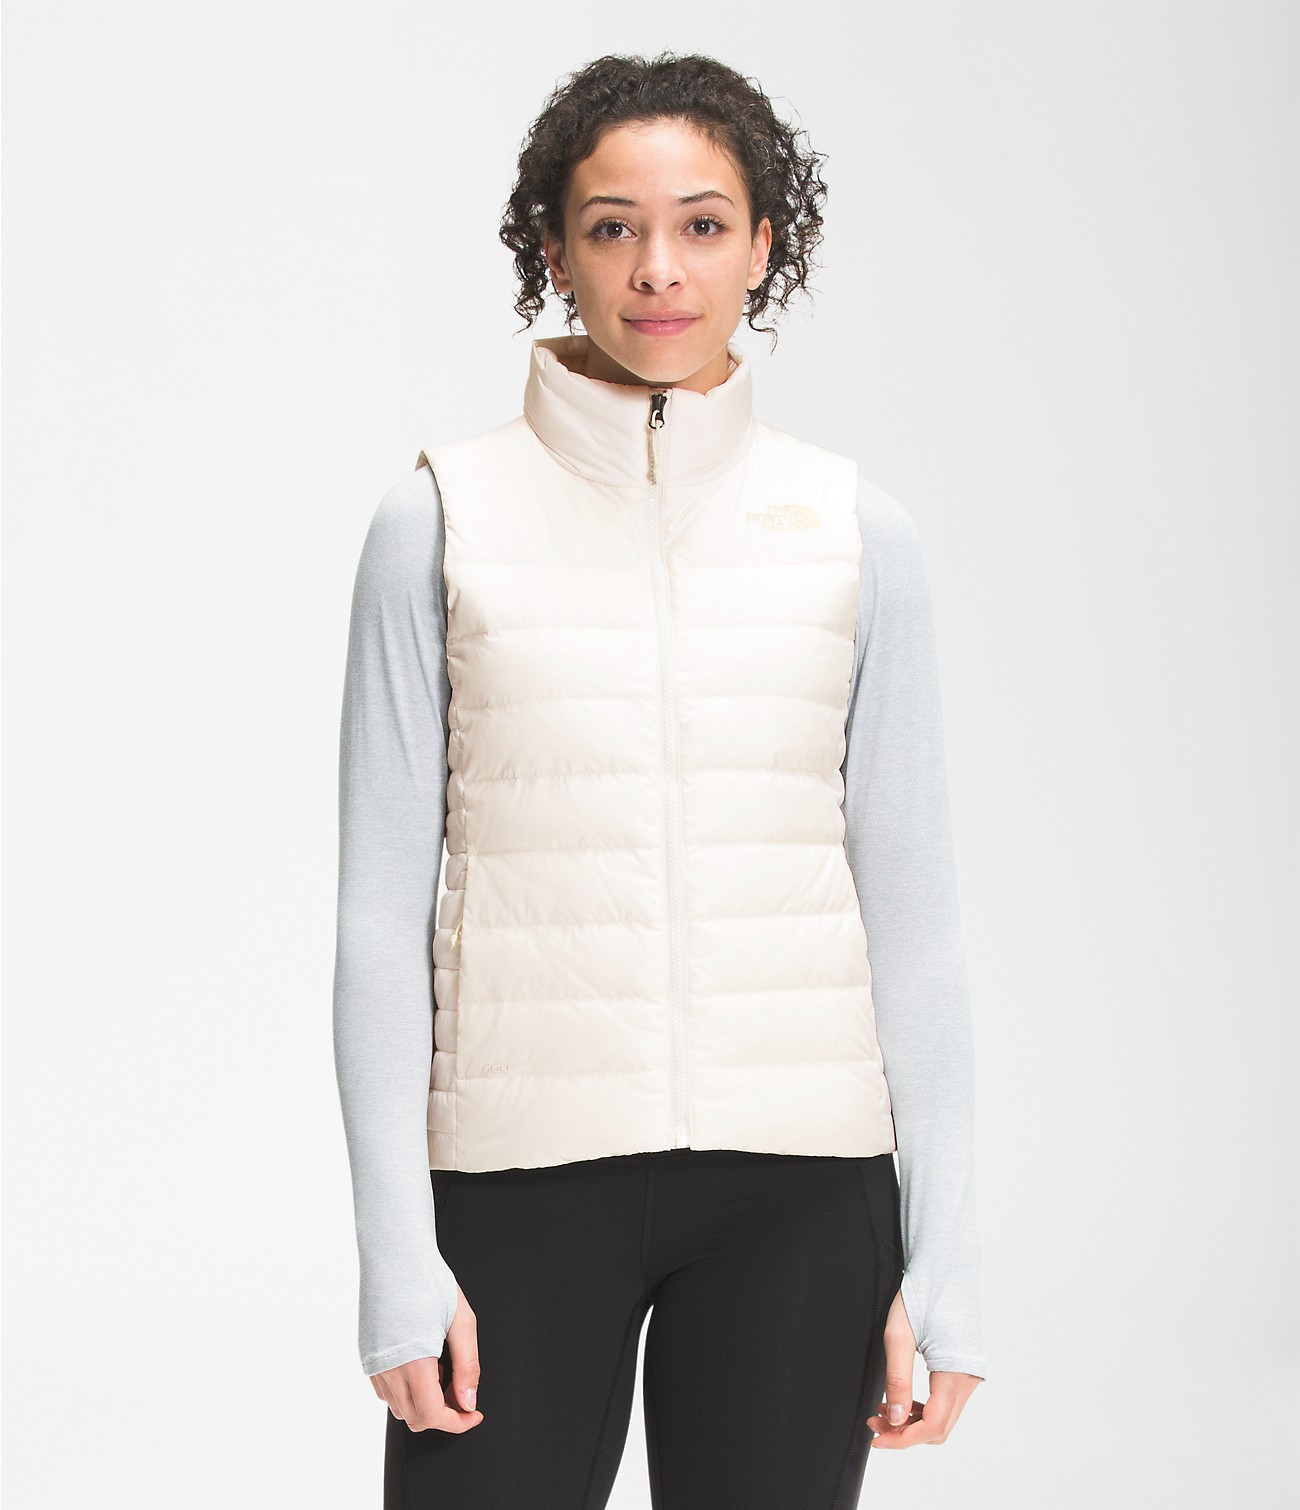 Unlock Wilderness' choice in the Moncler Vs North Face comparison, the Aconcagua Vest by The North Face